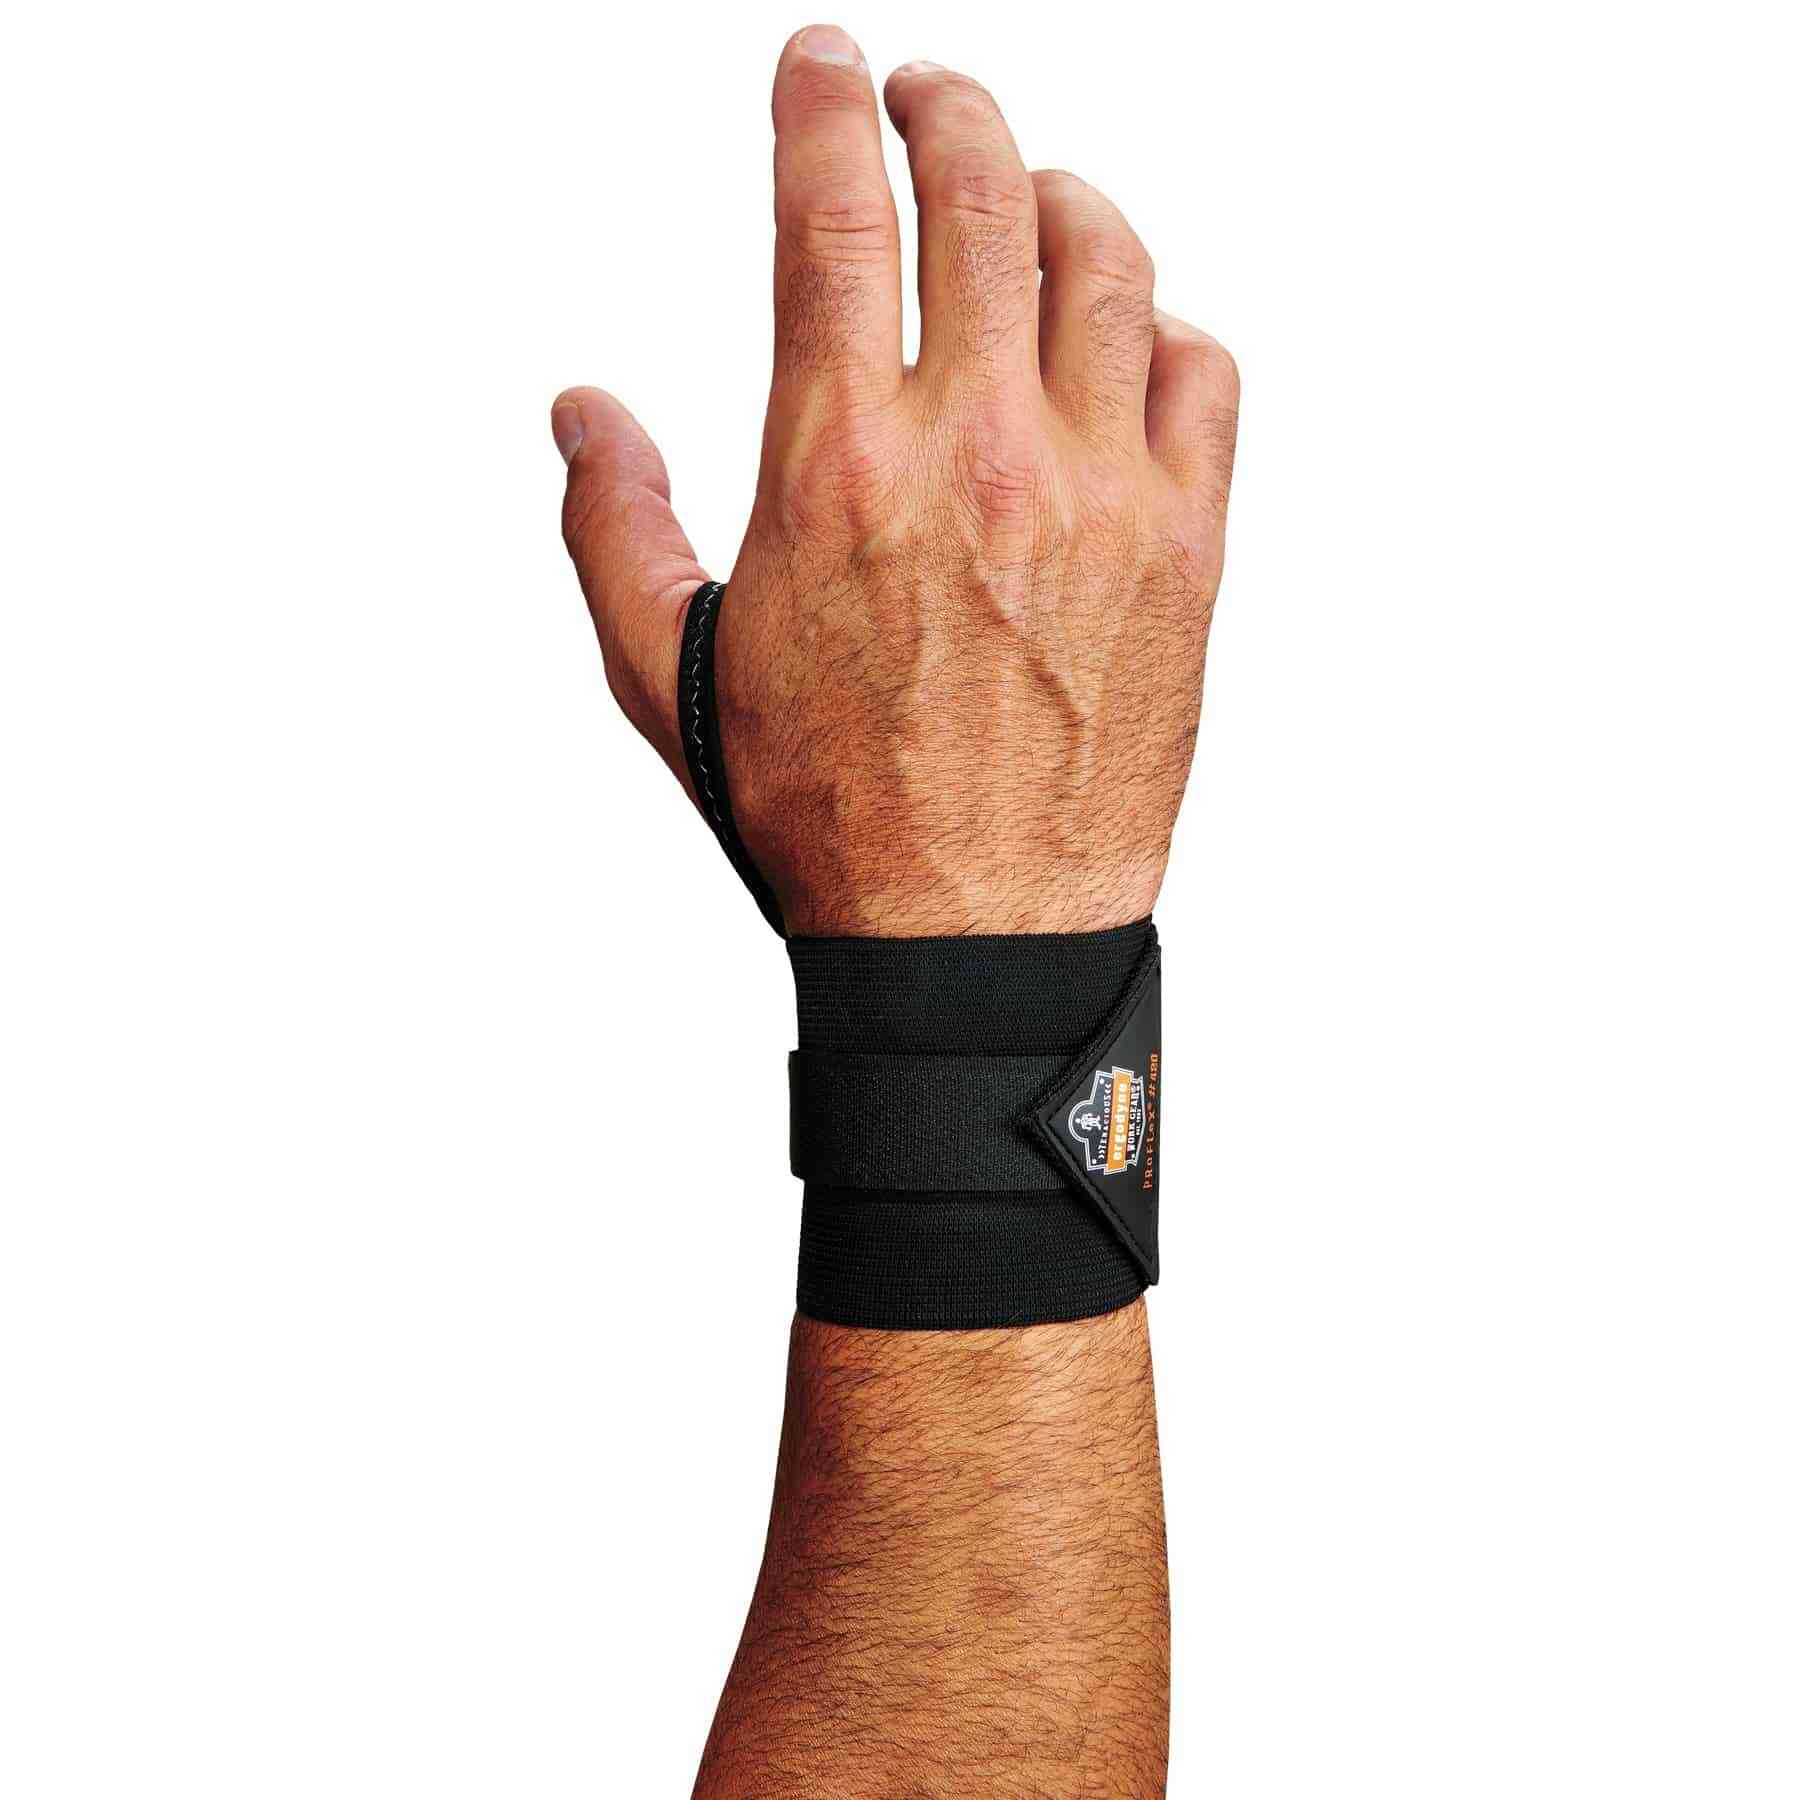 Wrist Wrap Support with Thumb Loop, Universal